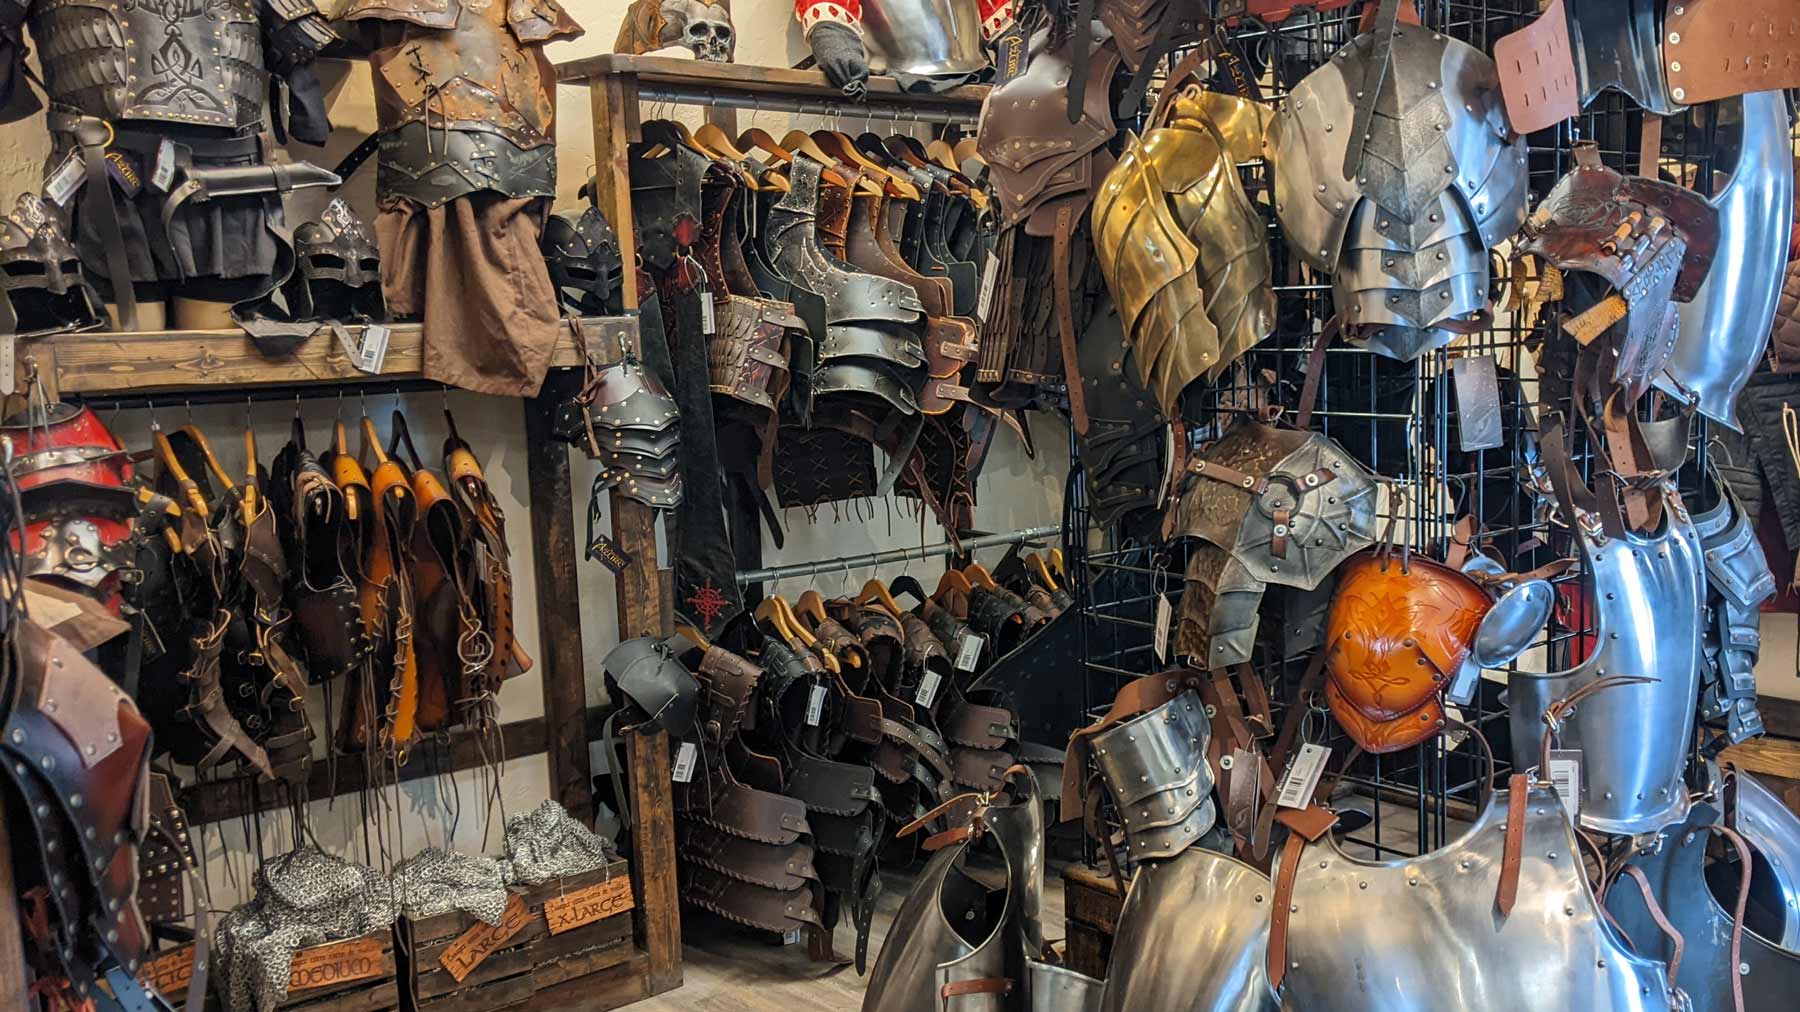 Photo of a section of our medieval store filled with leather and metal LARP armor.